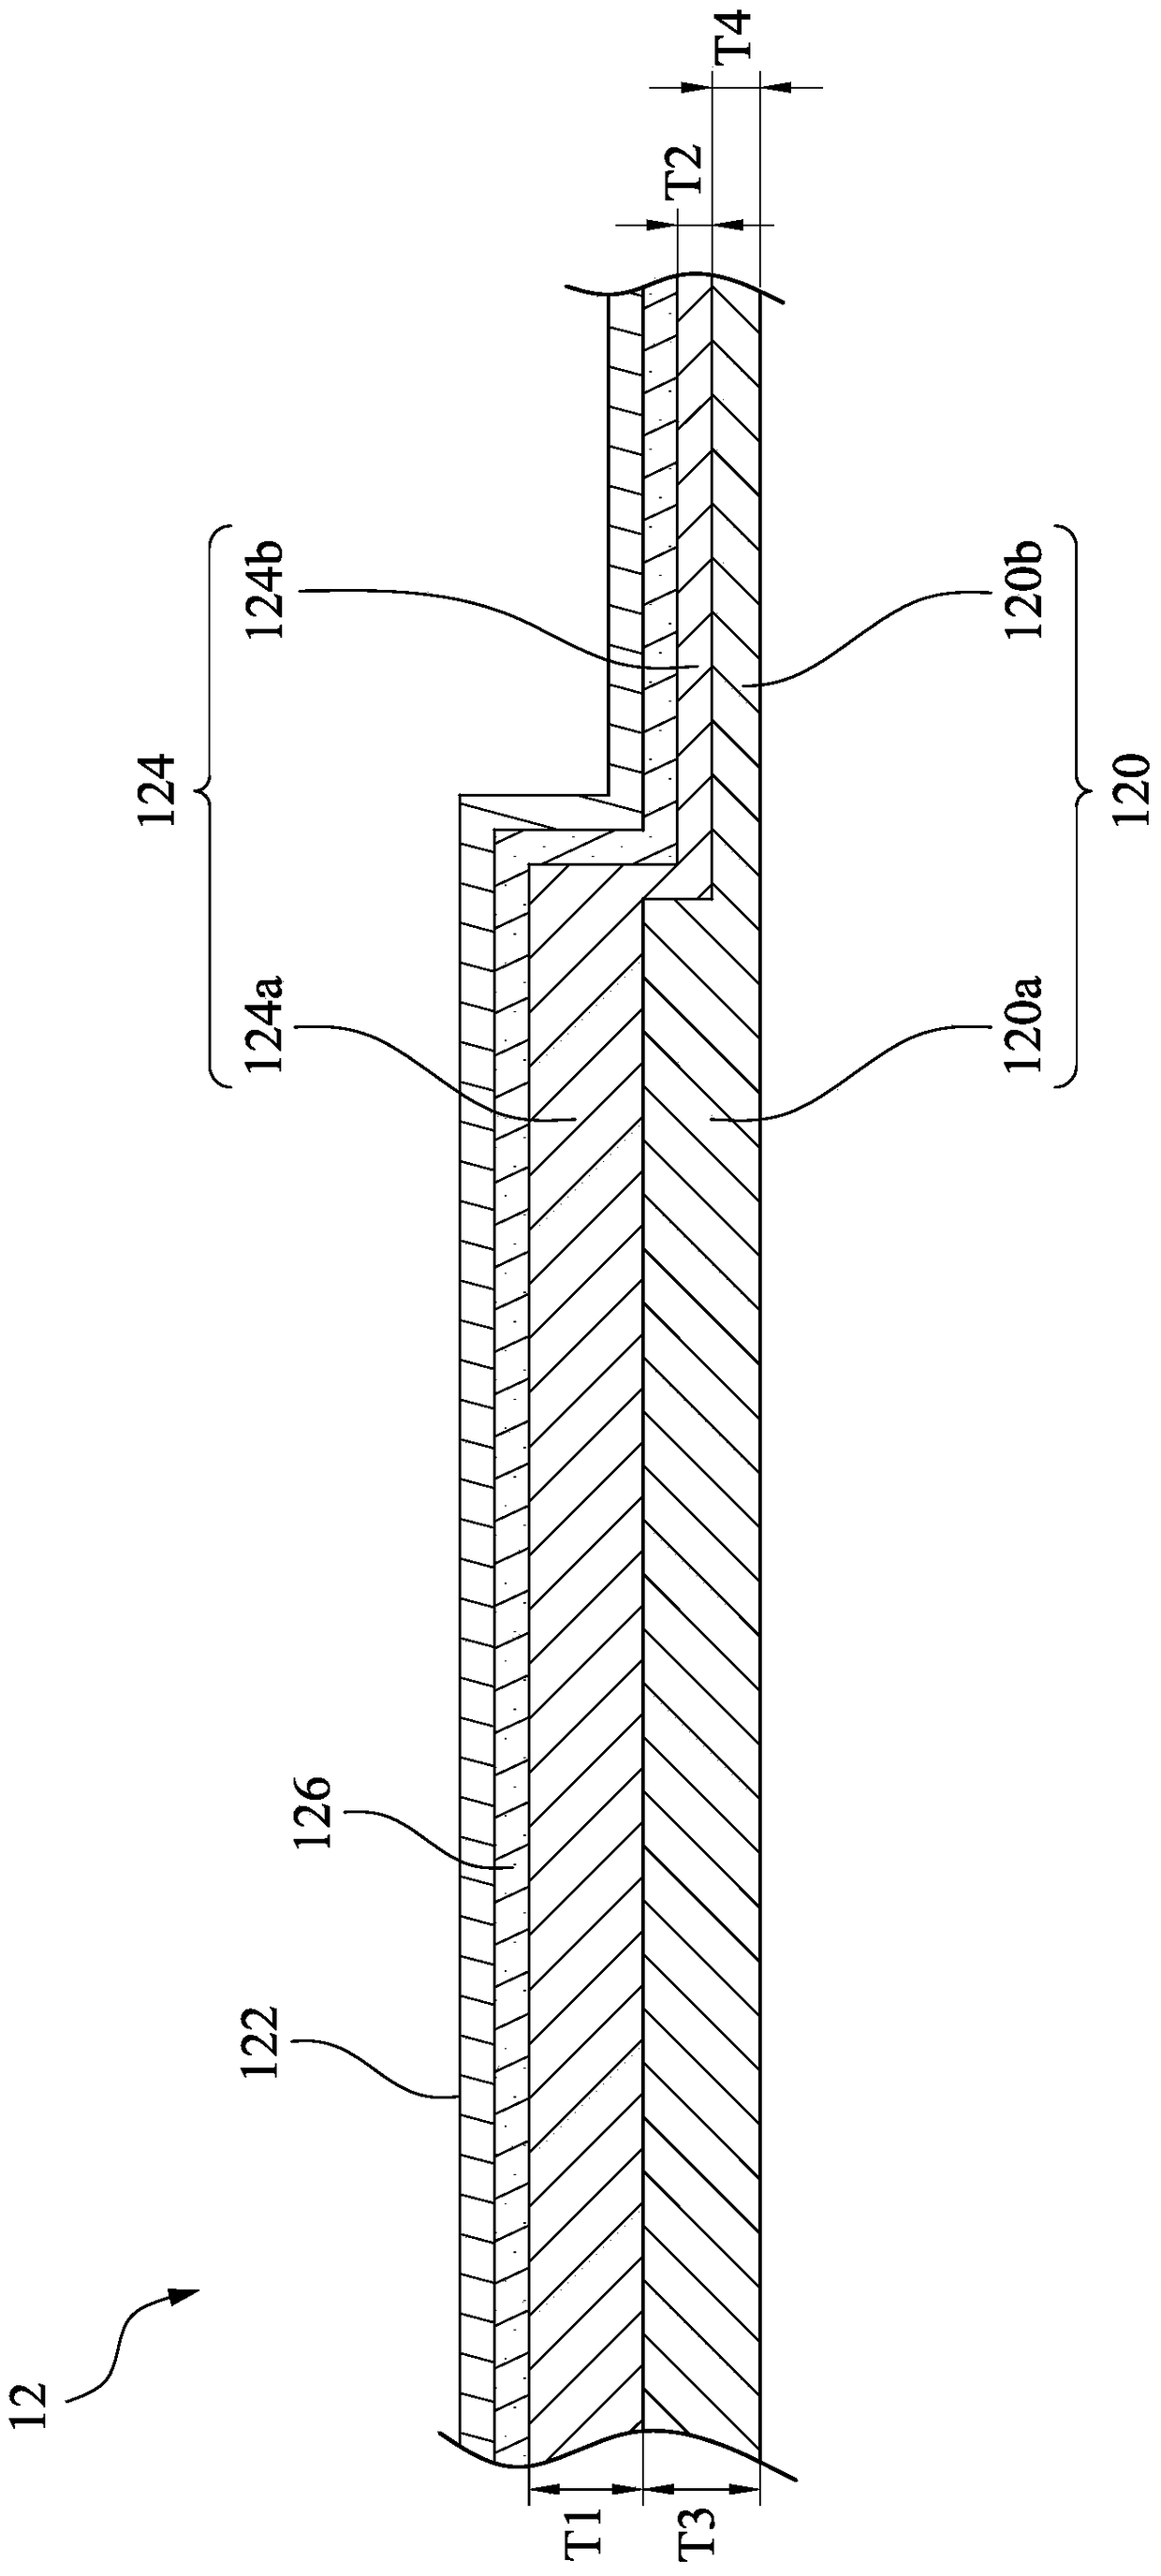 Overlay structure, input device and method for manufacturing the overlay structure